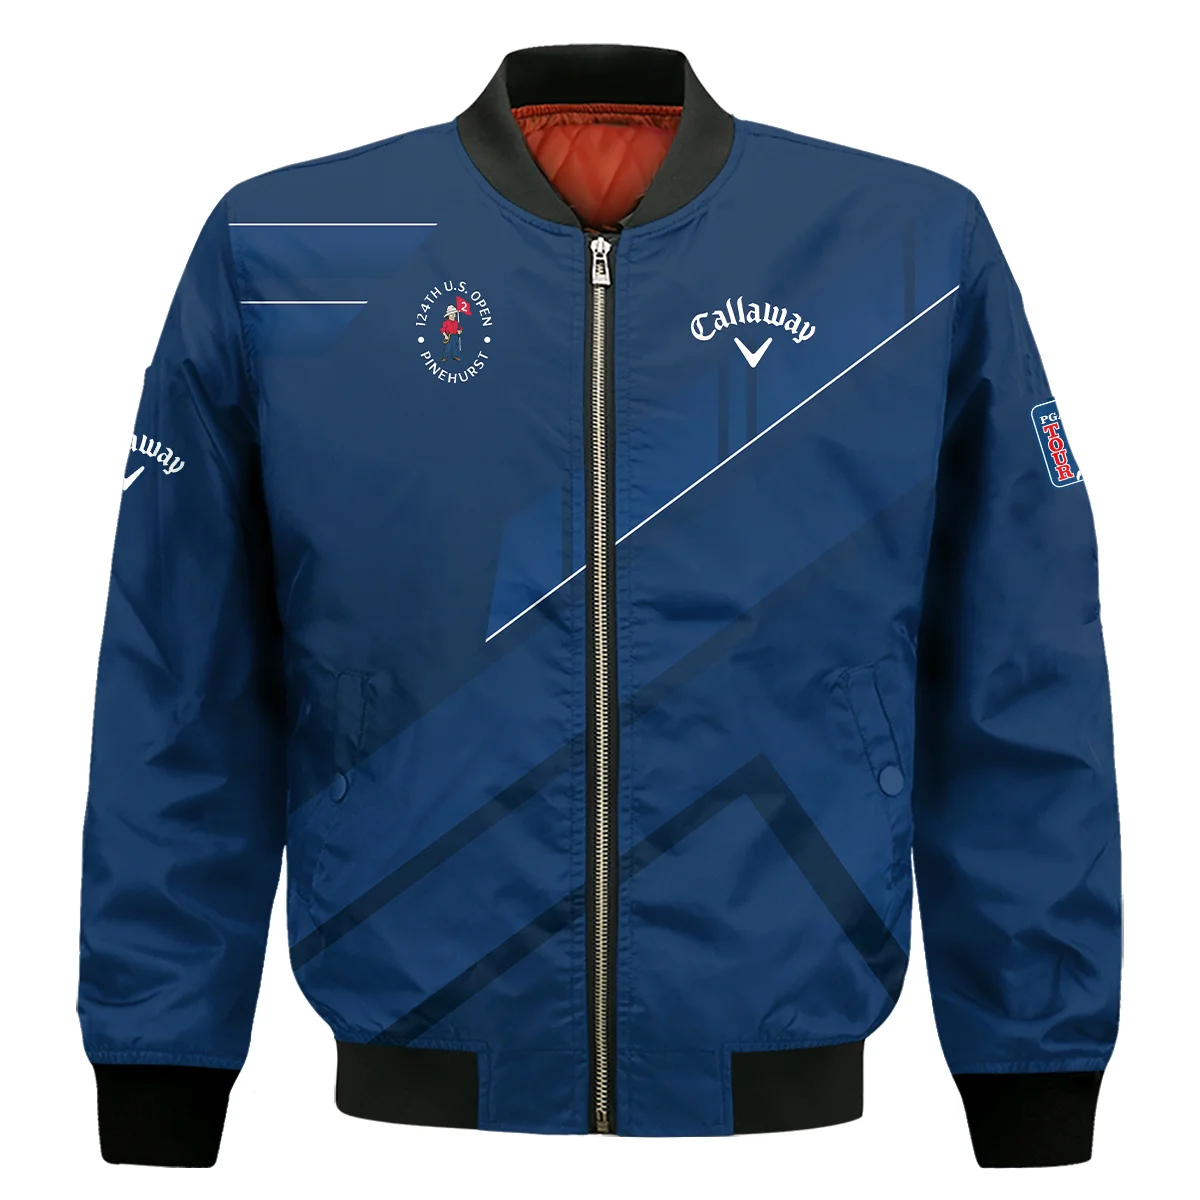 Callaway 124th U.S. Open Pinehurst Blue Gradient With White Straight Line Bomber Jacket Style Classic Bomber Jacket